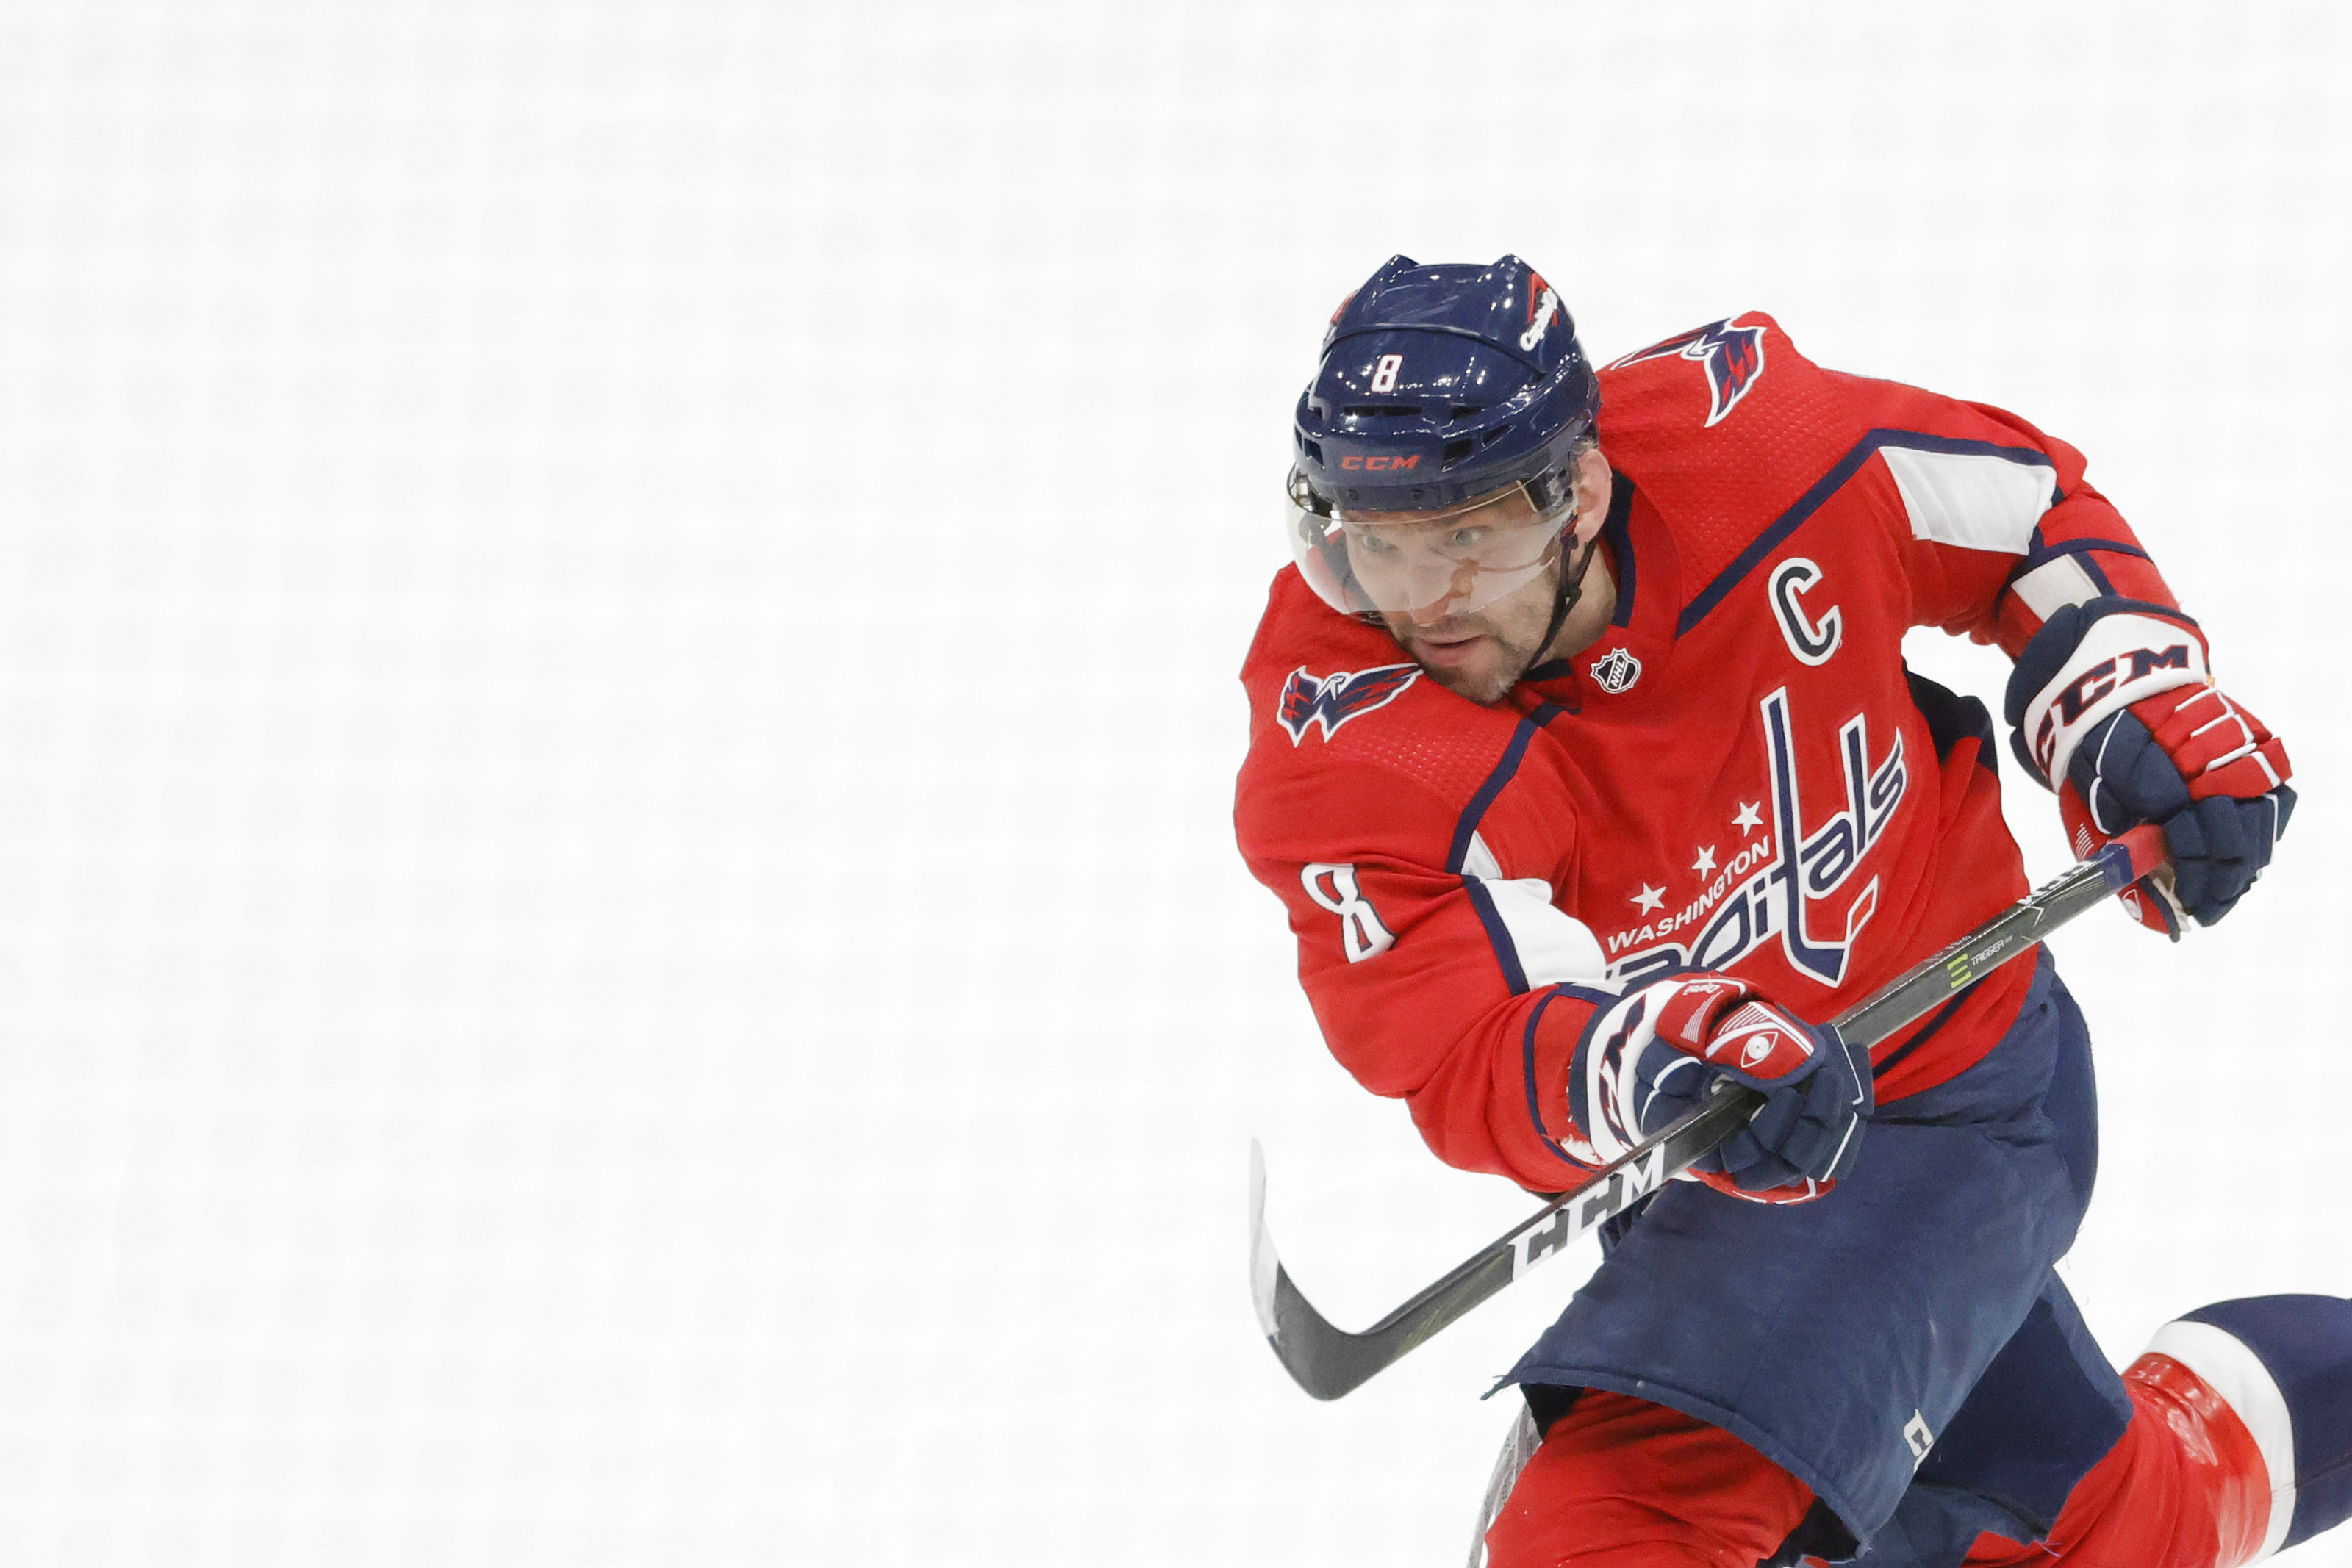 Alex Ovechkin hits 800 goals, shares 'special moment' with